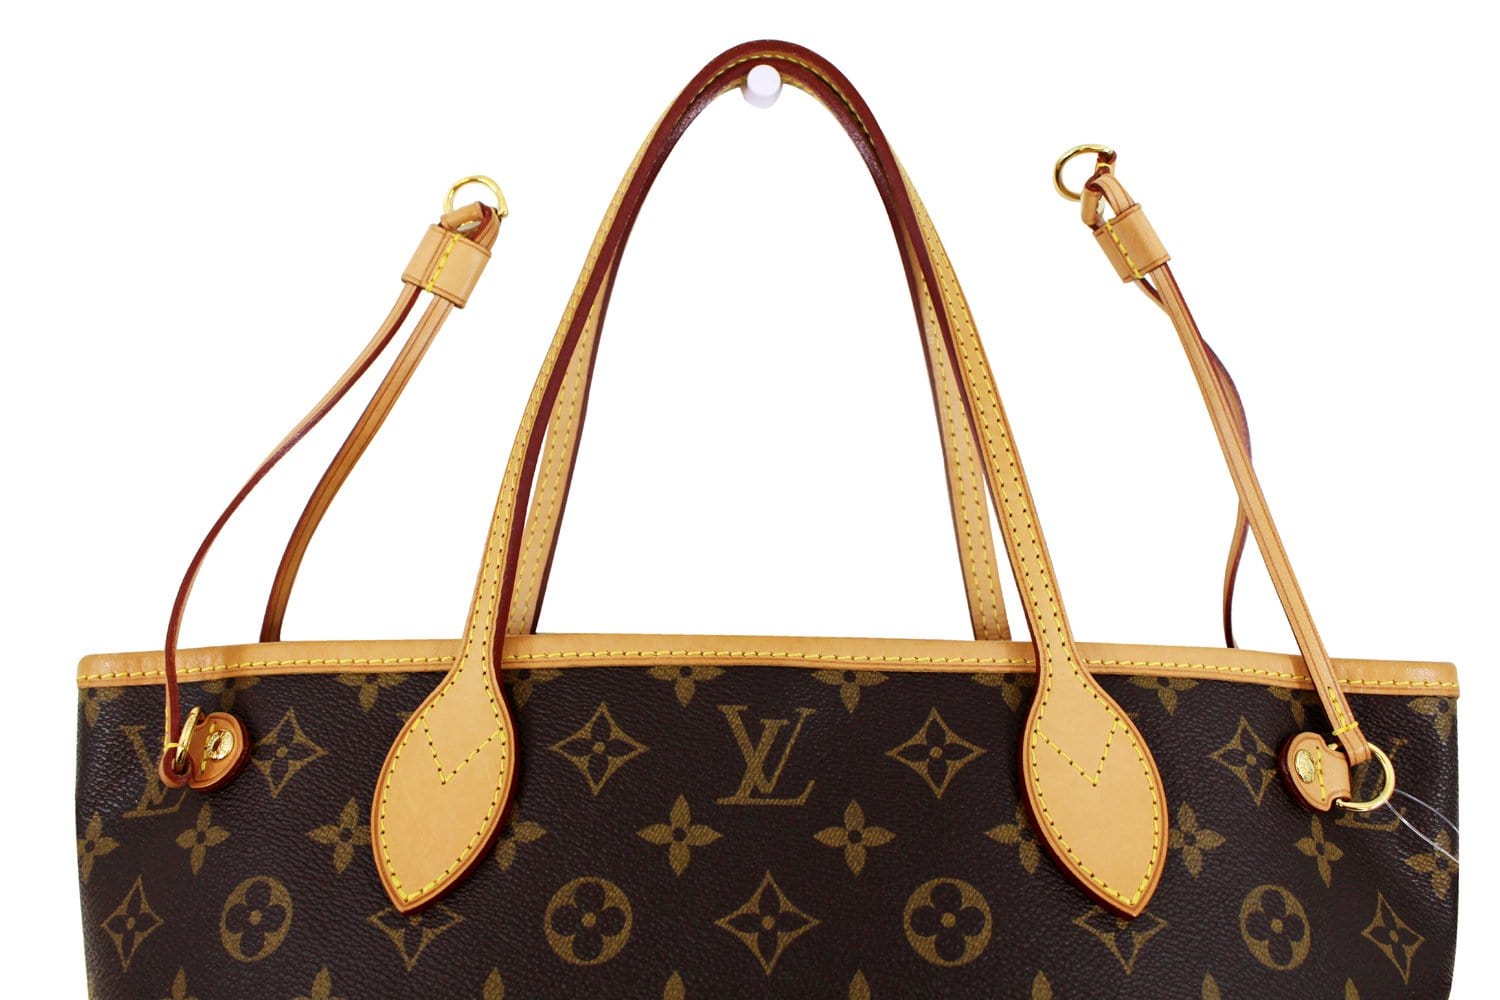 Louis Vuitton - 2021 Pre-Owned Neverfull PM Tote Bag - Women - Pvc - One Size - Brown